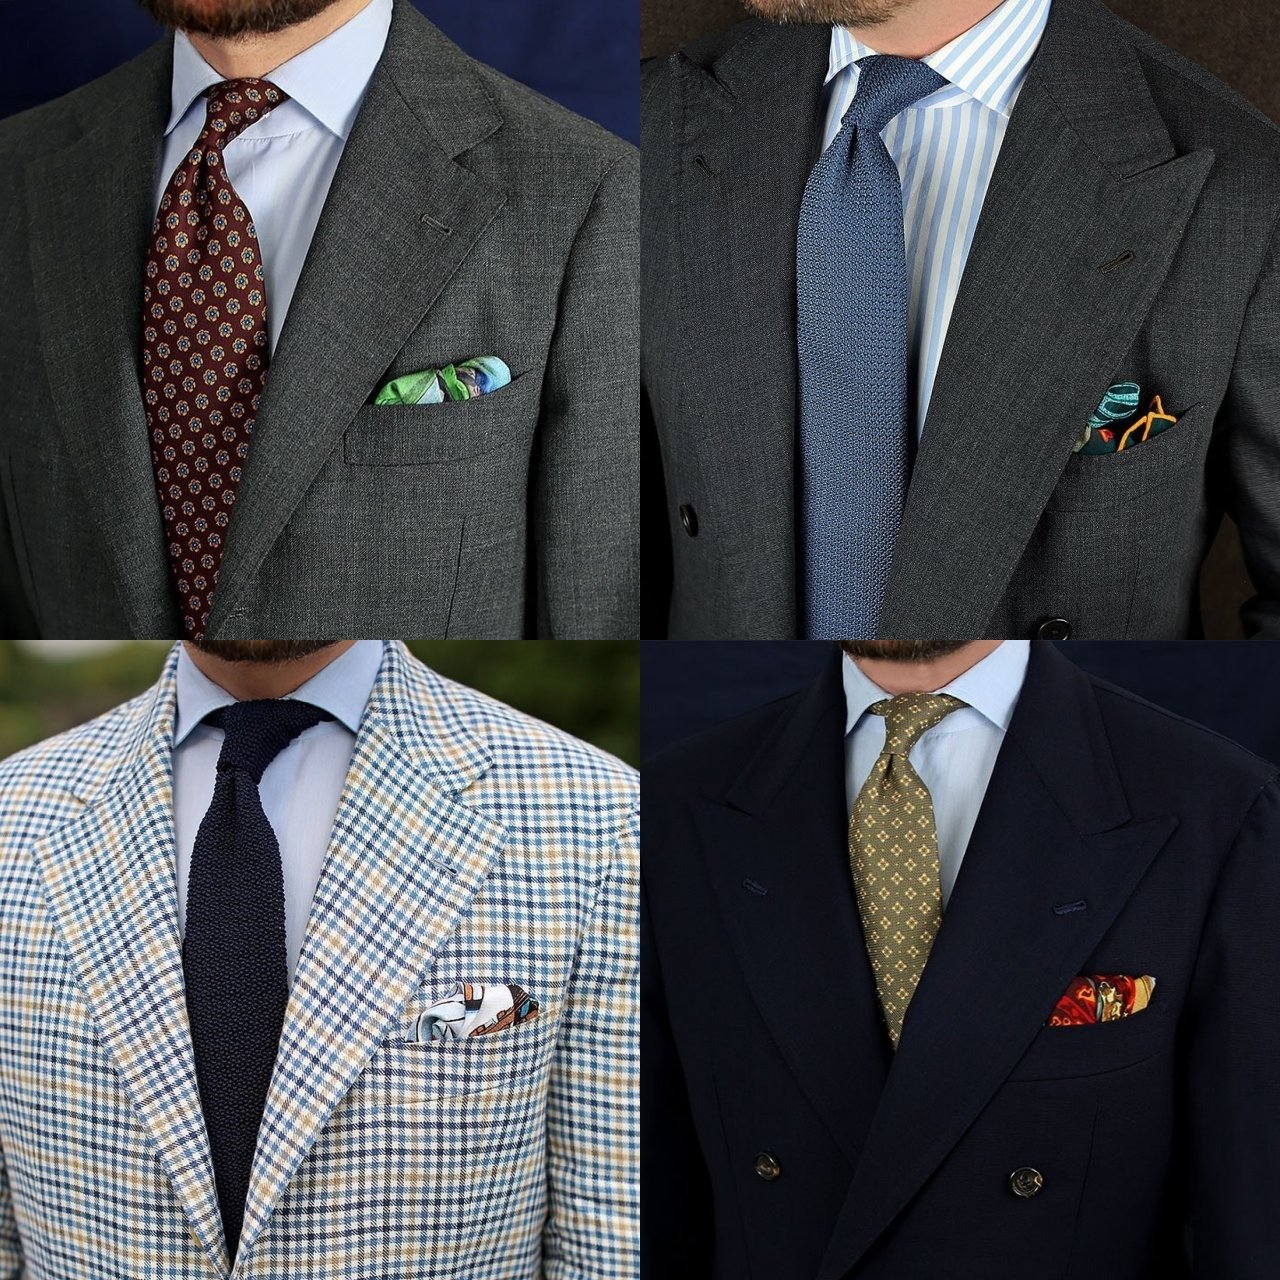 How to match a tie to shirt and suit - one pattern